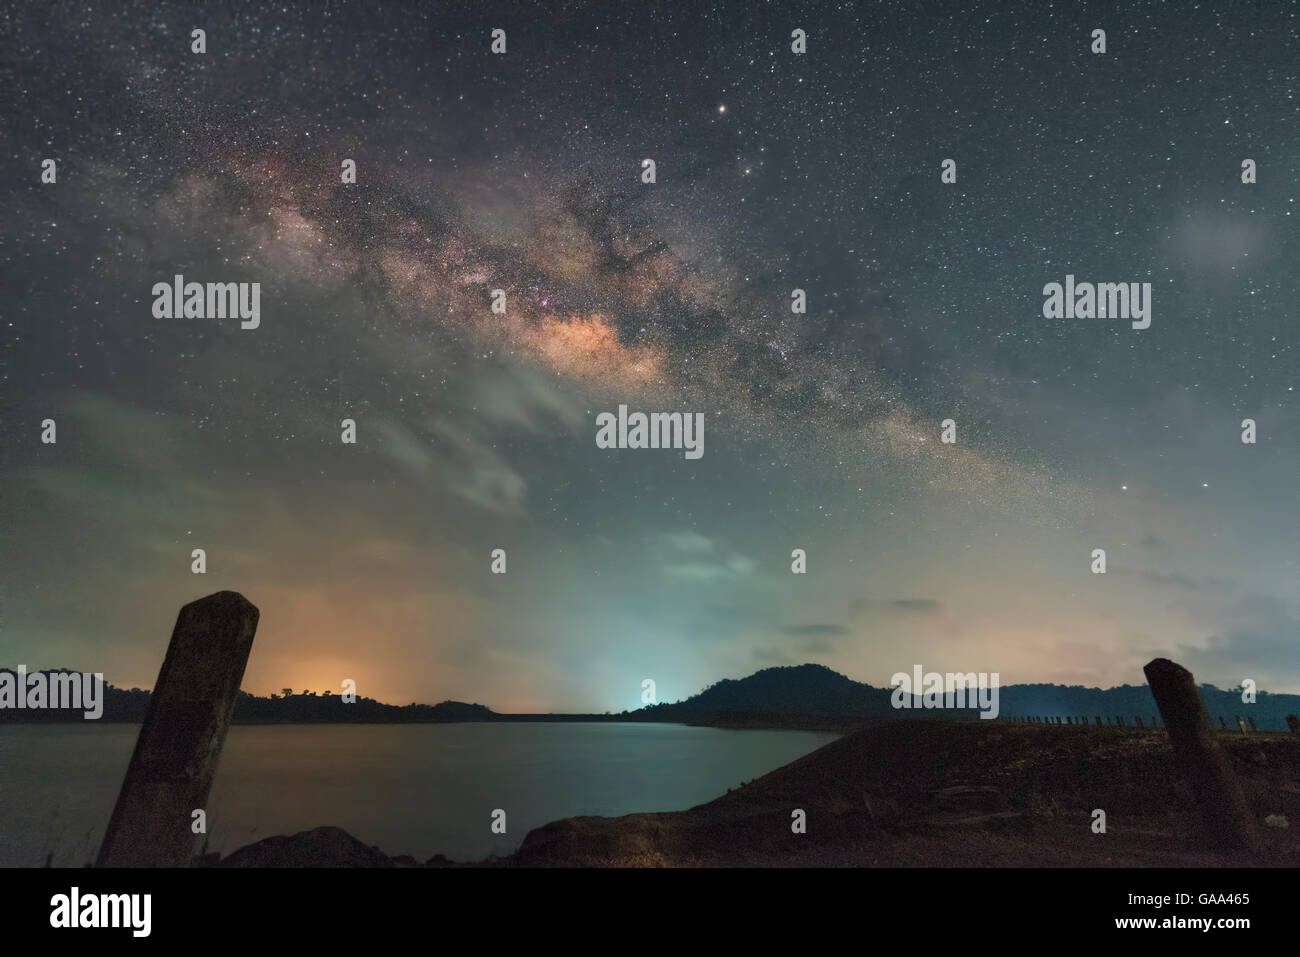 Milky way over the lake Stock Photo